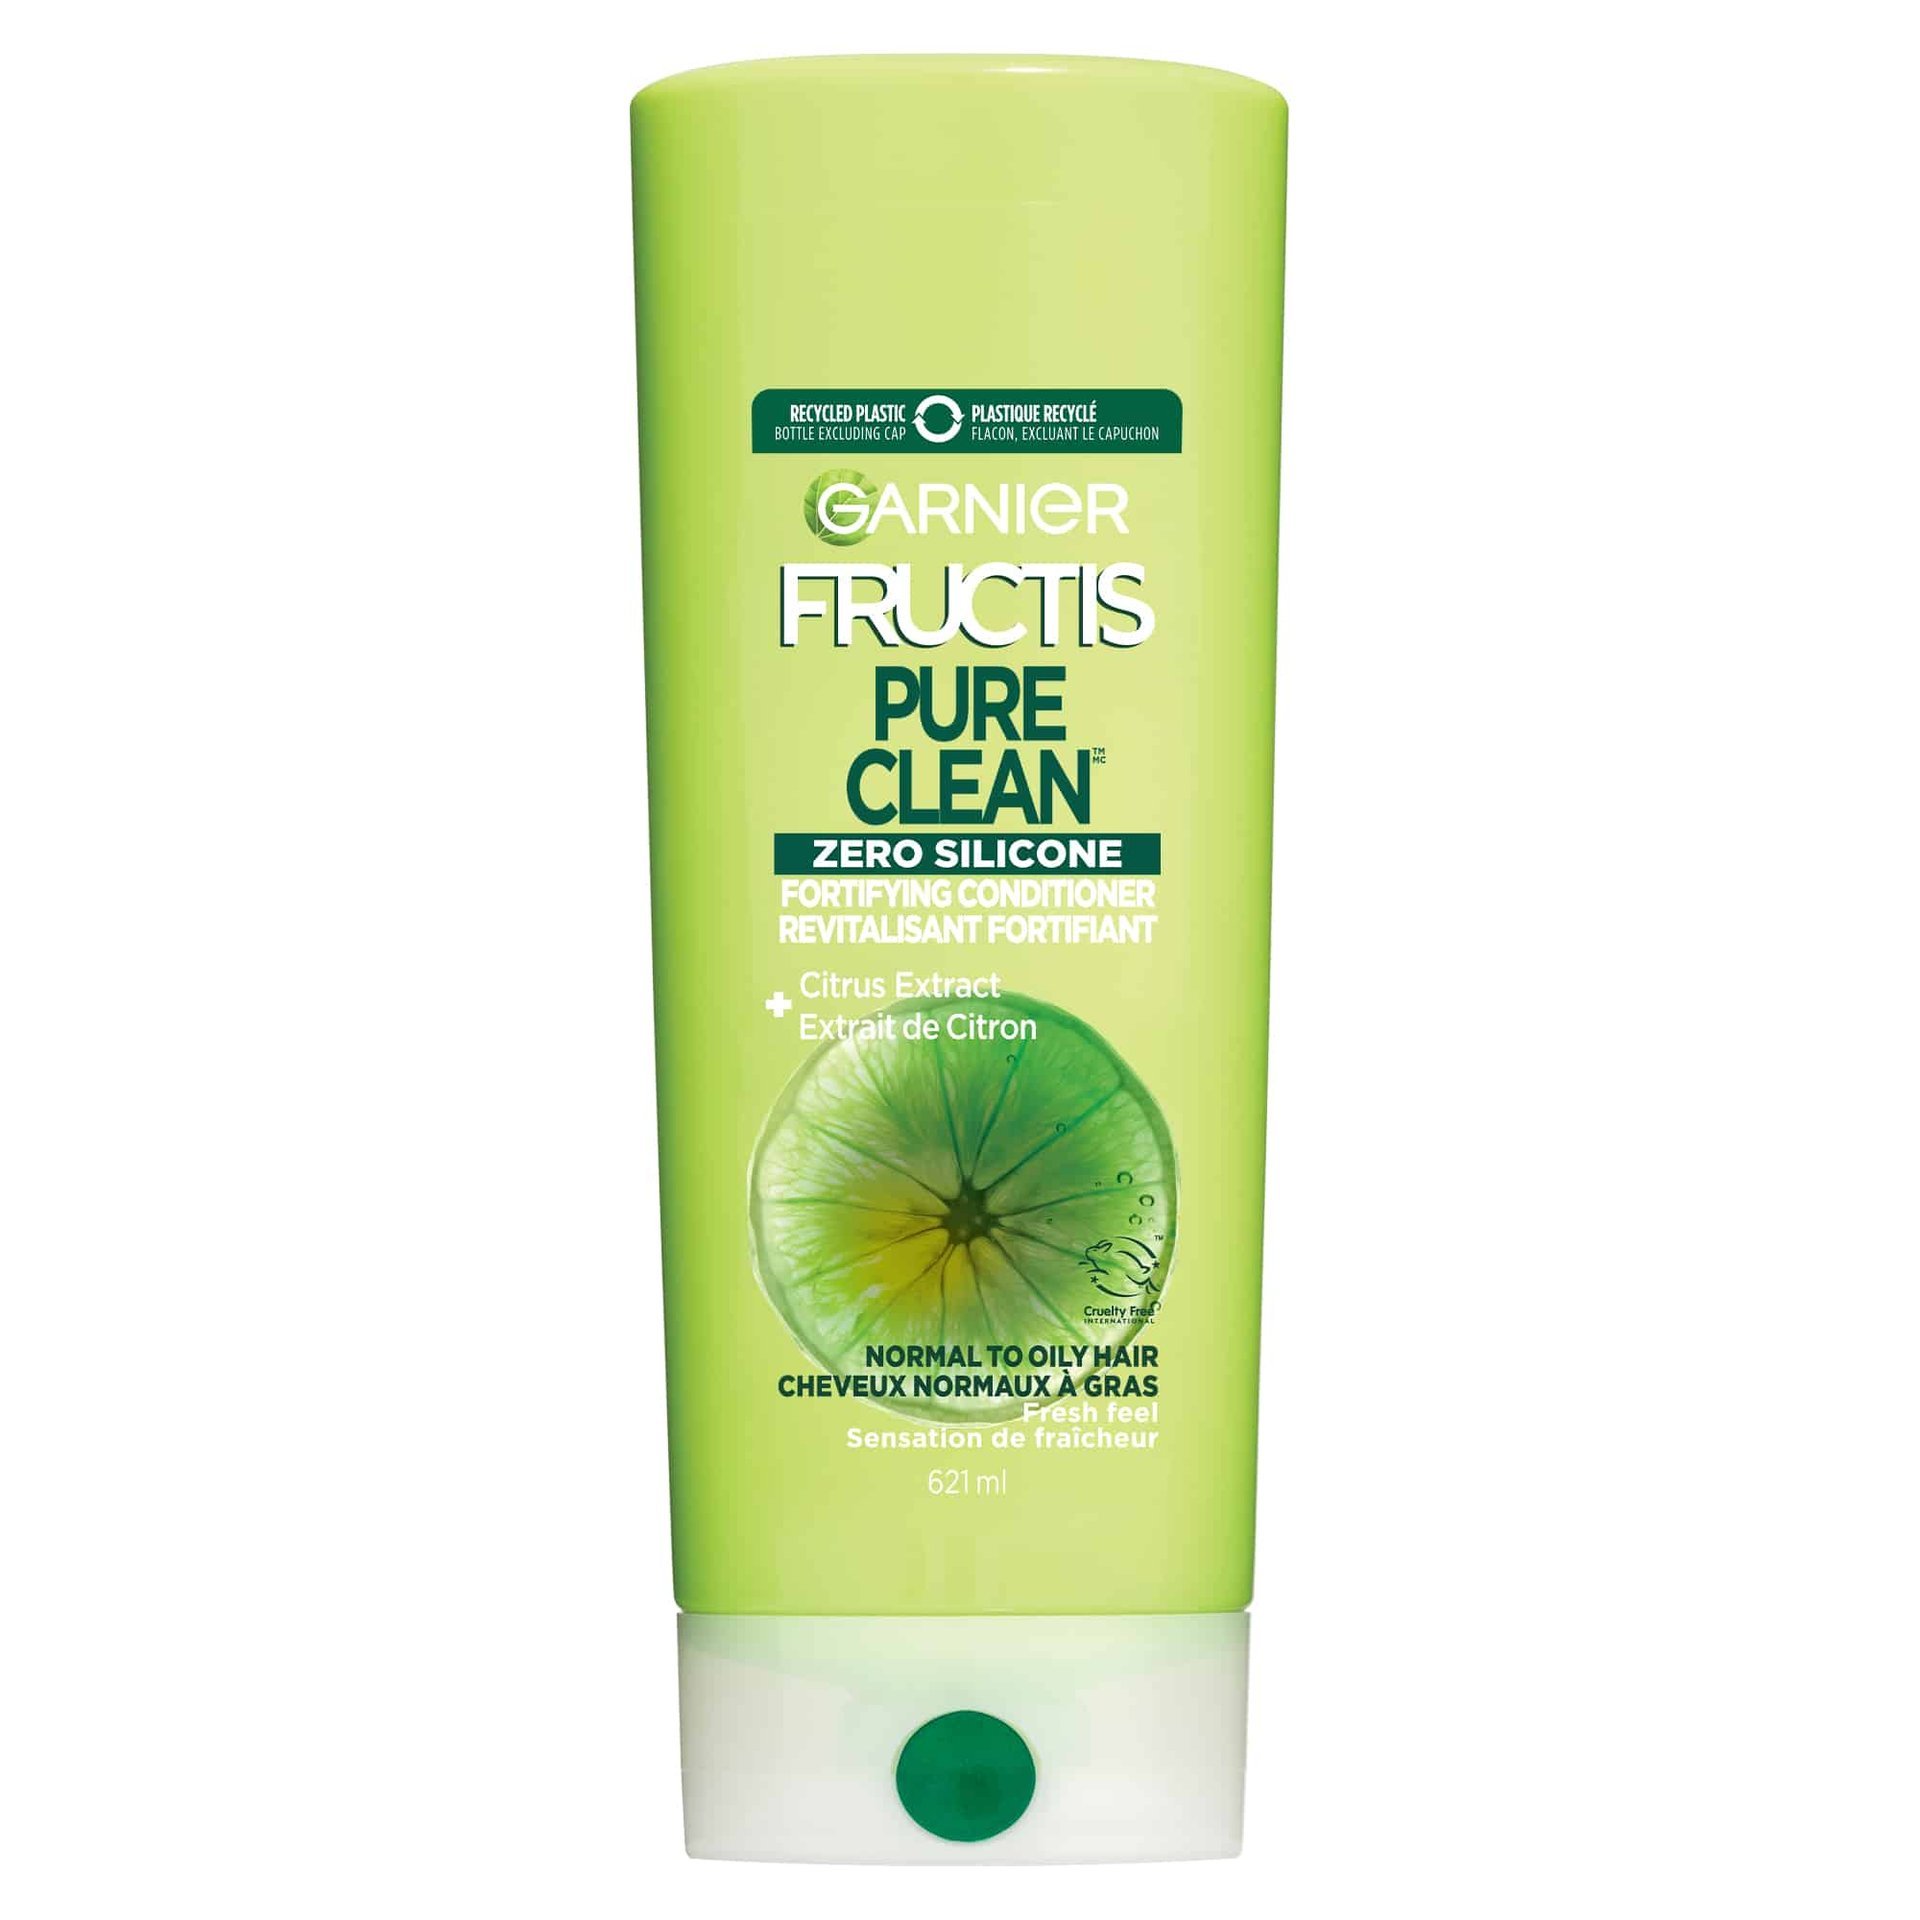 Conditionner fructis pure clean 621ml Front 603084073191